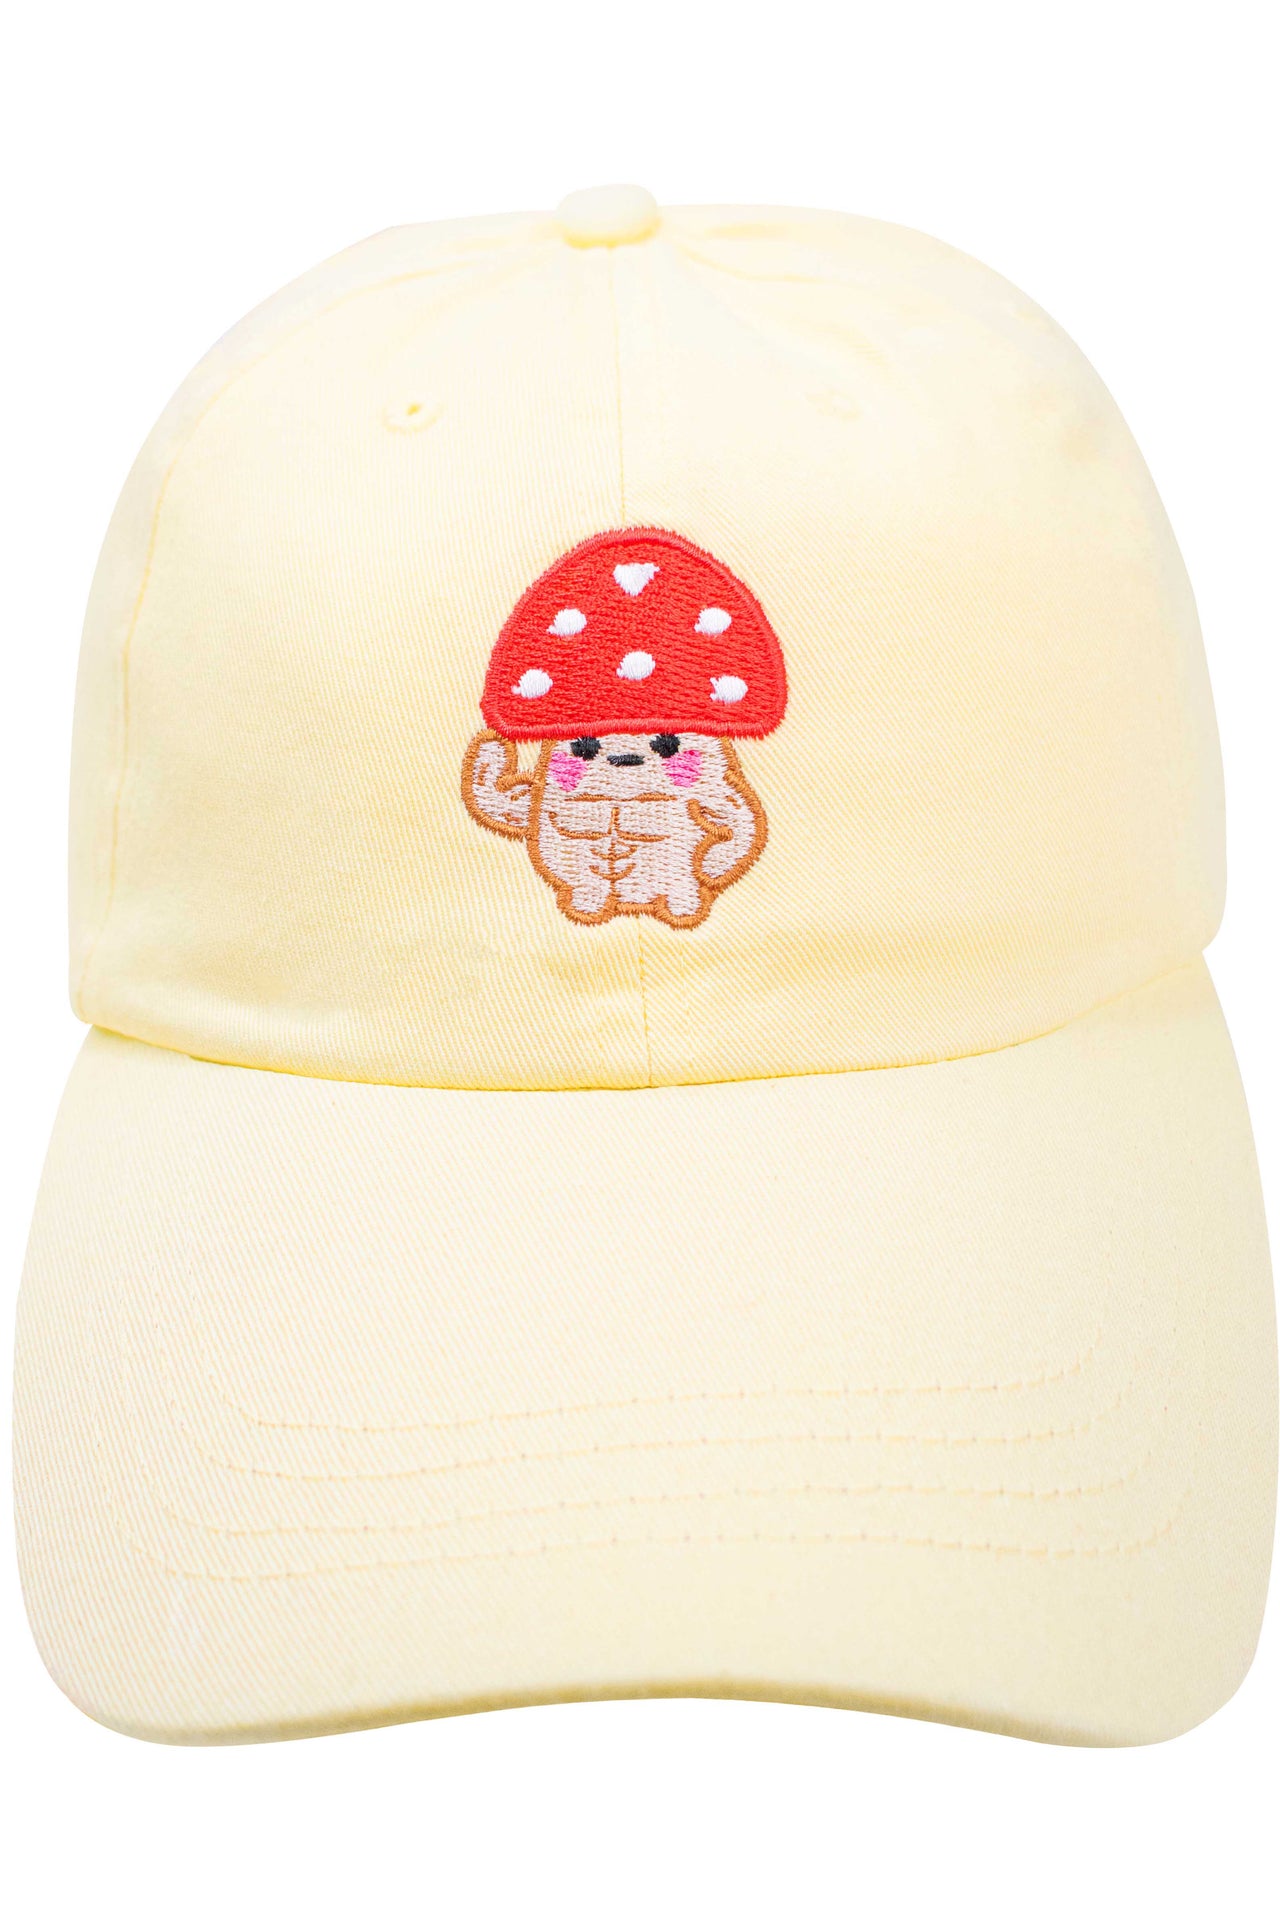 Mighty Mushroom Friend Embroidered Cap